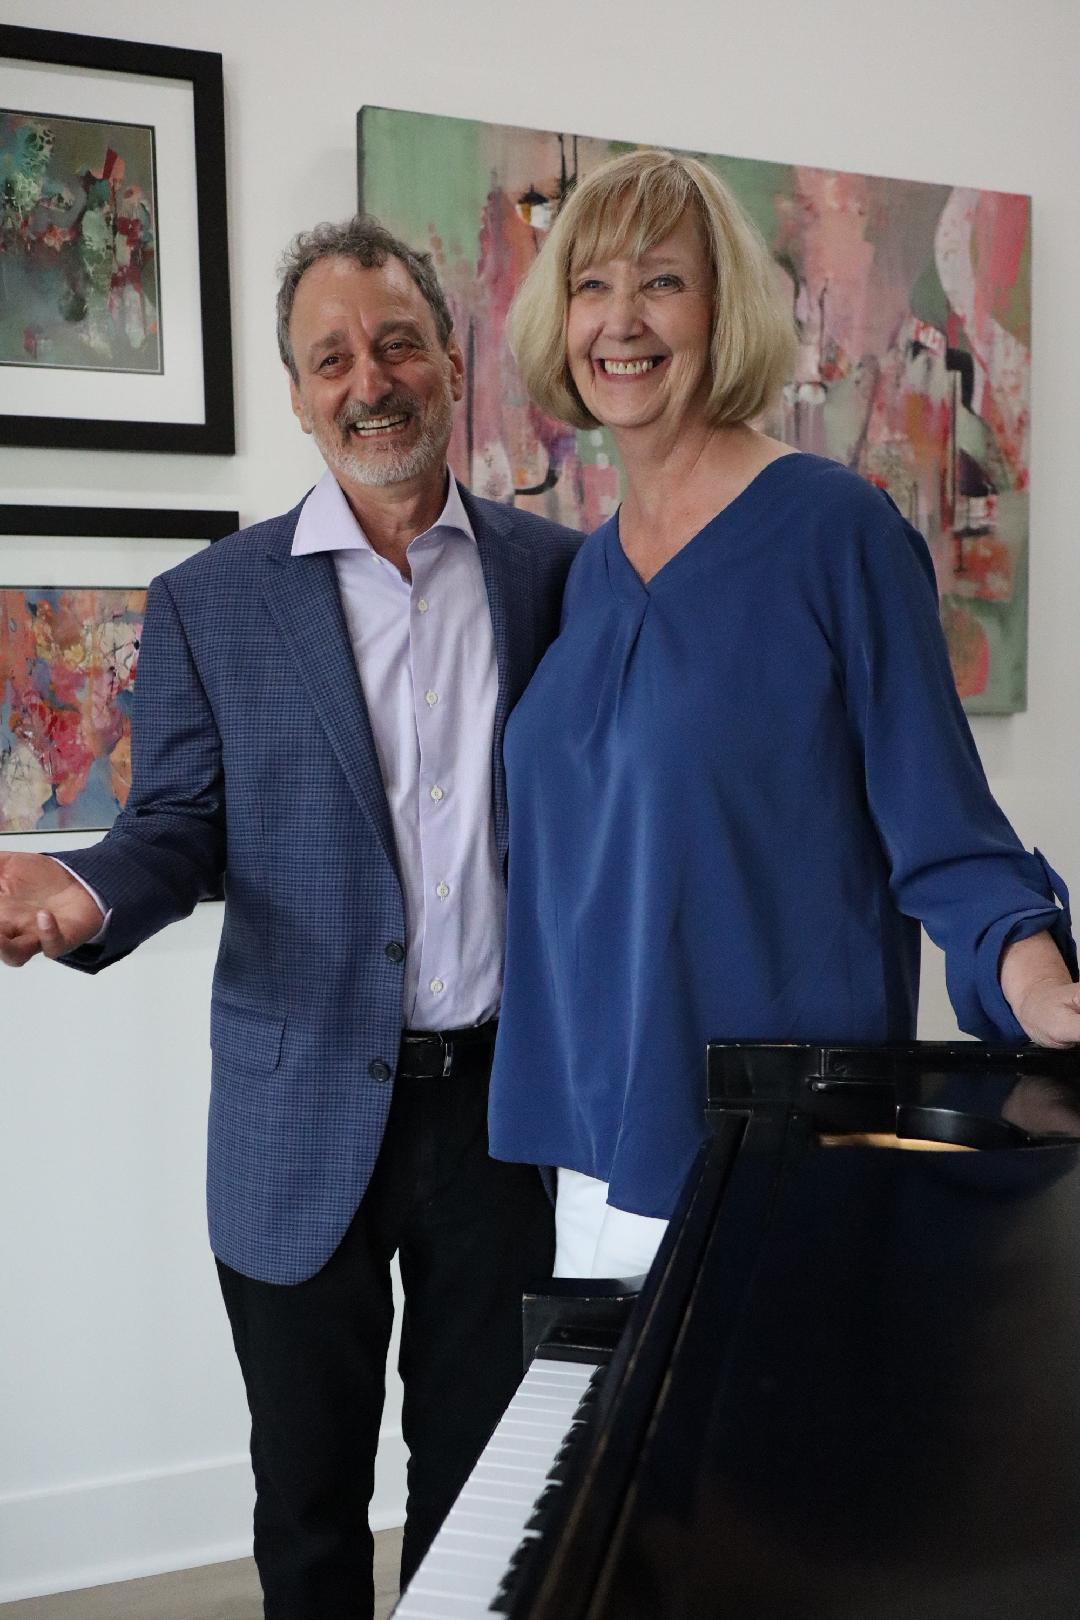 Alan Wasserman and Midge Johnson are excited to welcome the public to their gallery opening. (Courtesy photo)